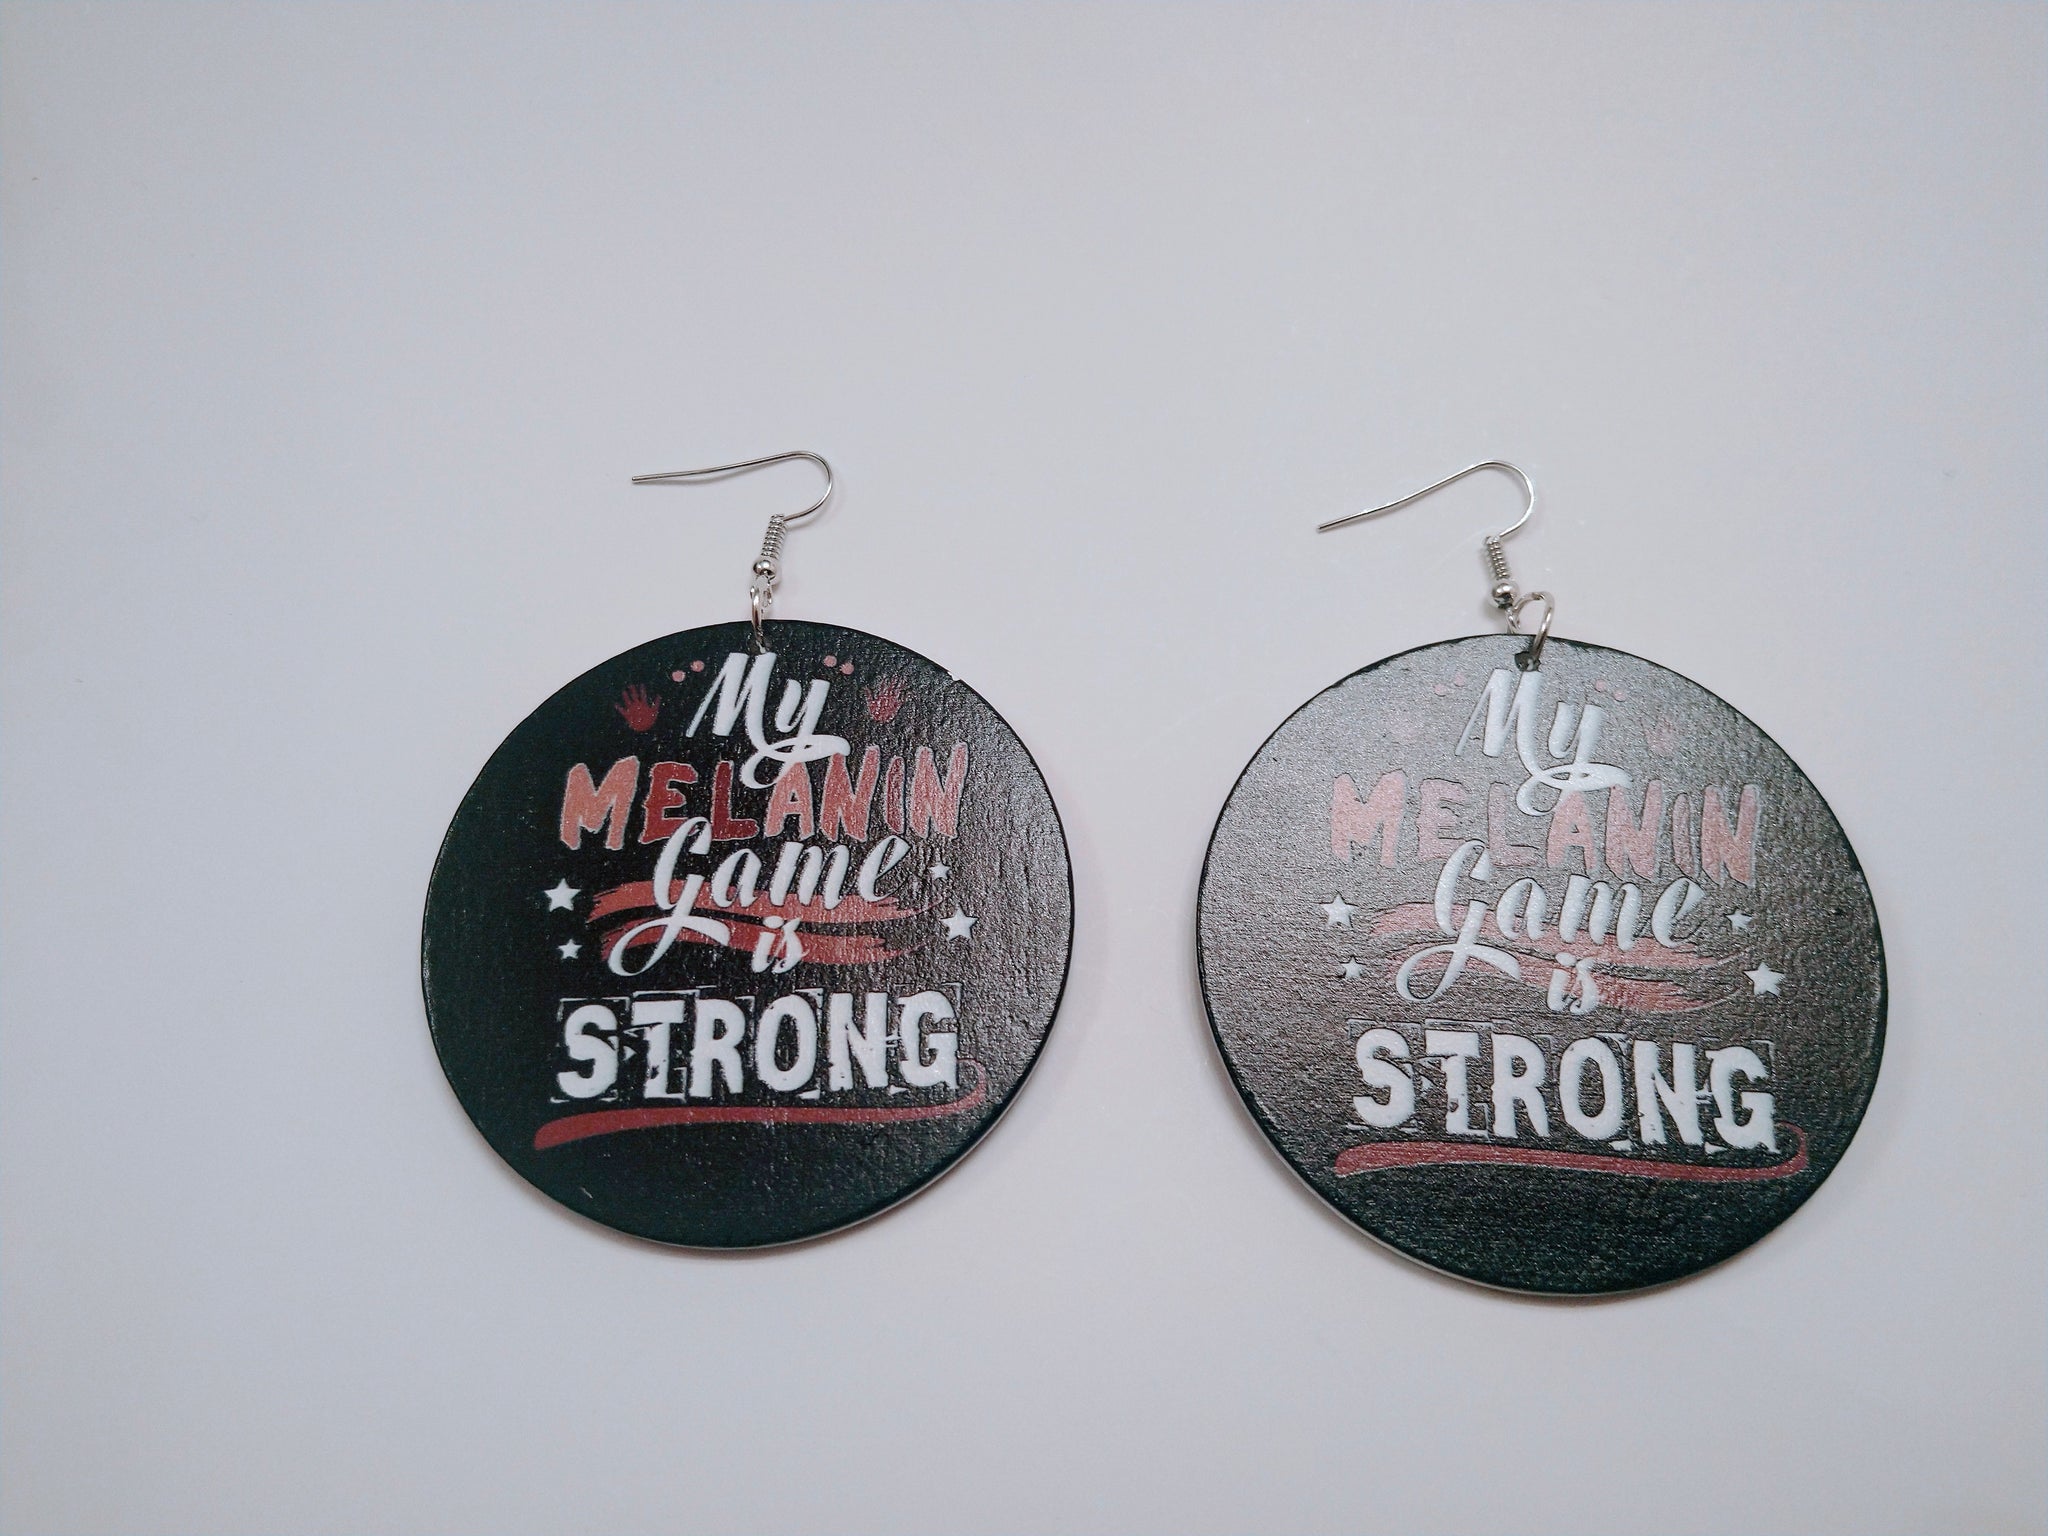 Handmade hook "My Melanin Game is Strong" earrings - HPK Personalized Products and more